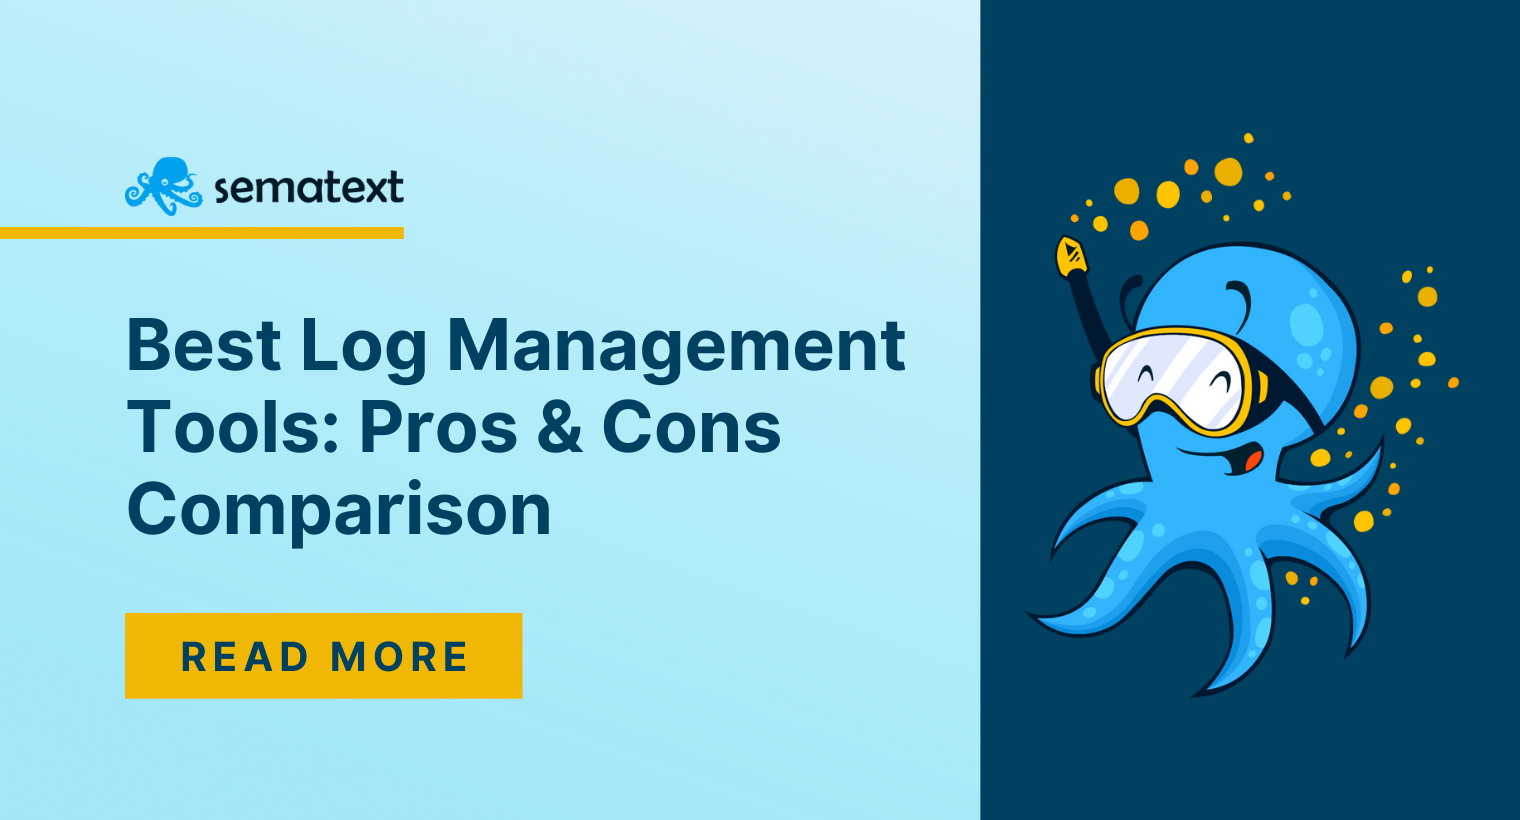 20+ Best Log Management Tools for Monitoring, Analytics & More: Pros & Cons Comparison [2022]